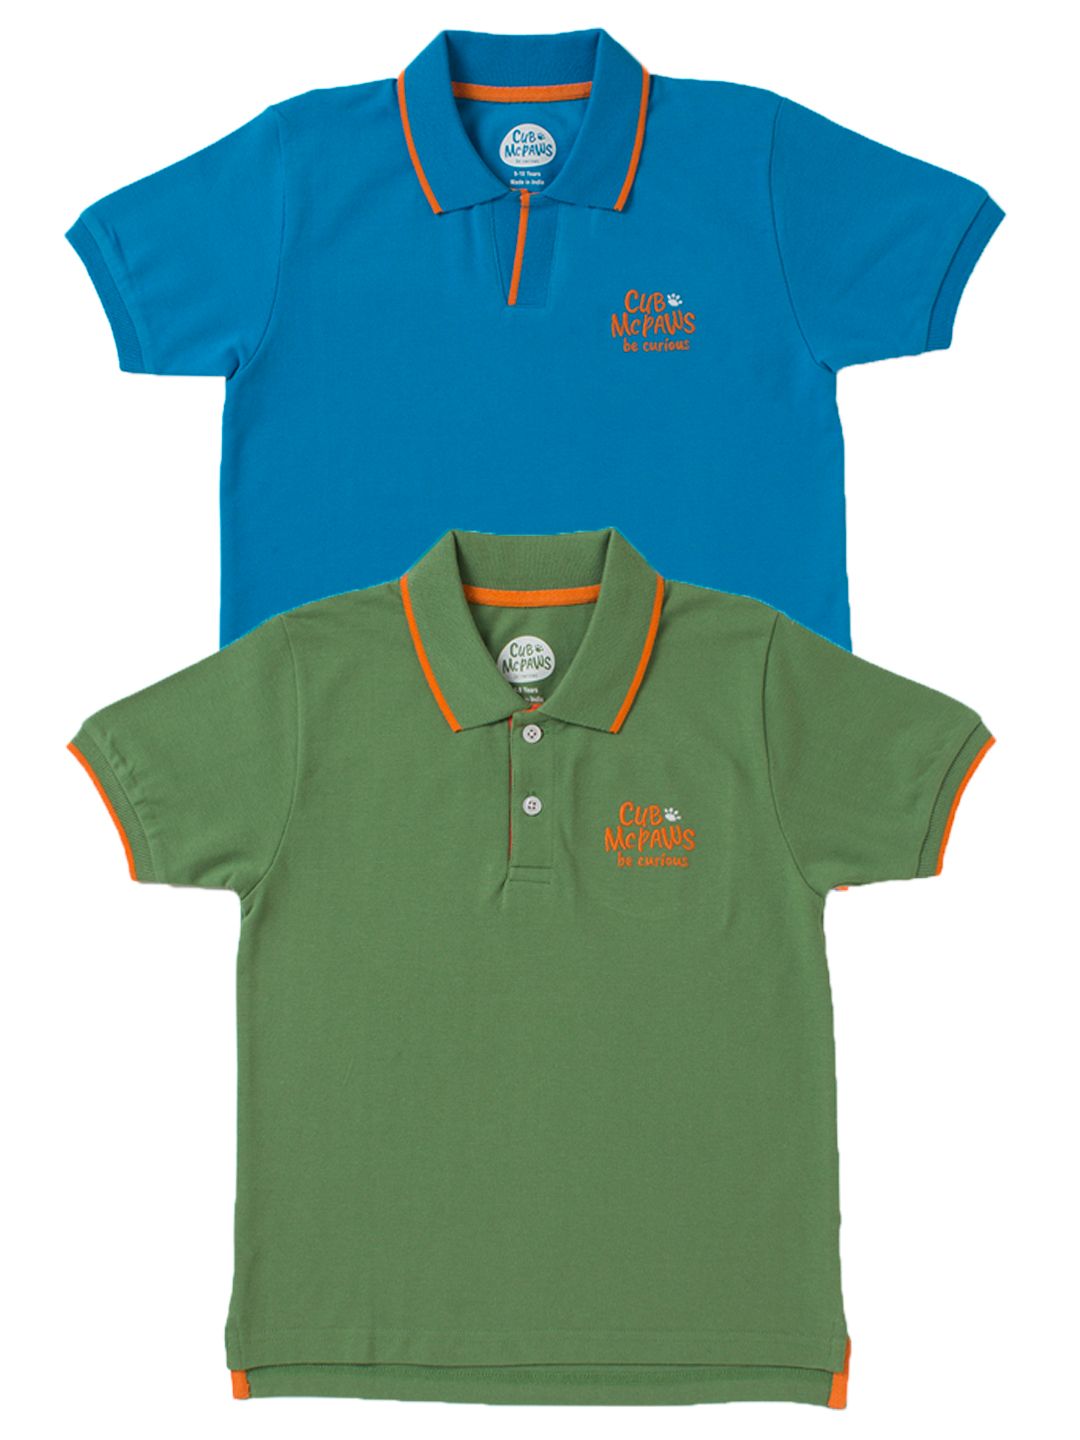 Boys Pack of 2 Classic Polo T-Shirts - Green & Blue